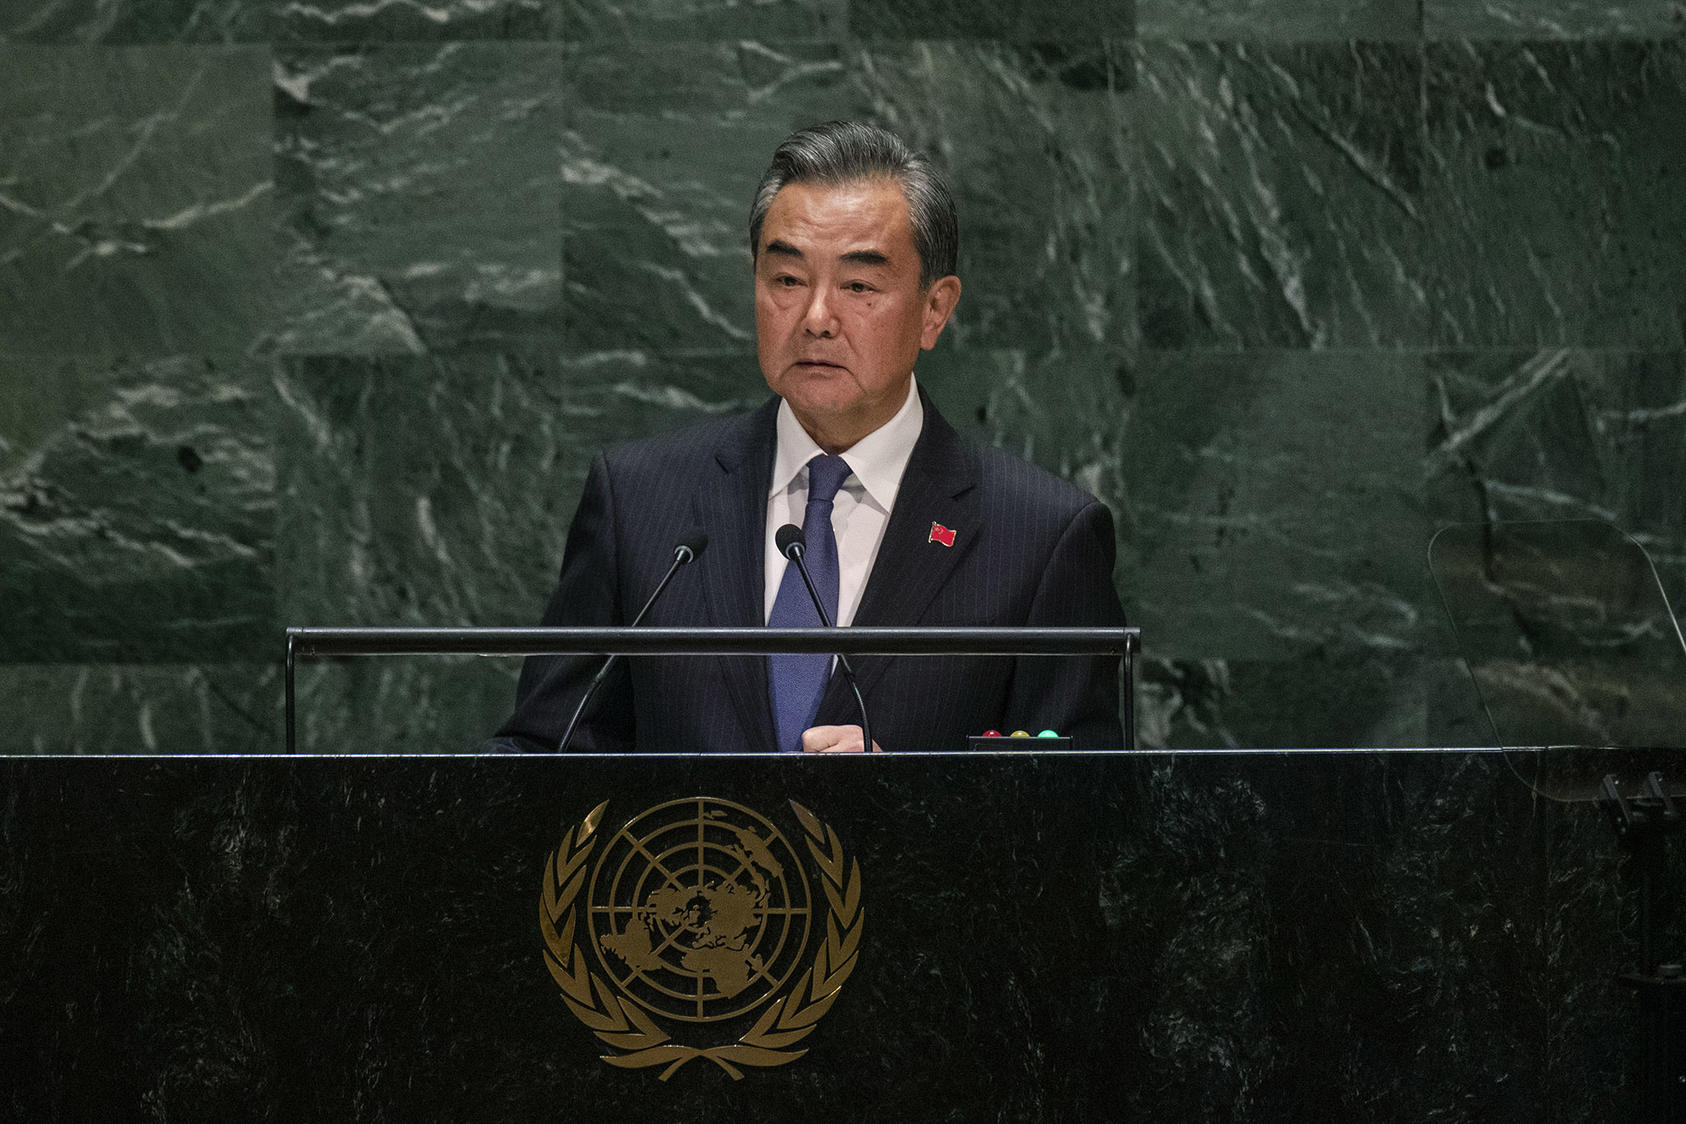 Foreign Minister Wang Yi of China addresses the United Nations General Assembly at the U.N. headquarters in New York, Sept. 27, 2019. (Brittainy Newman/The New York Times)